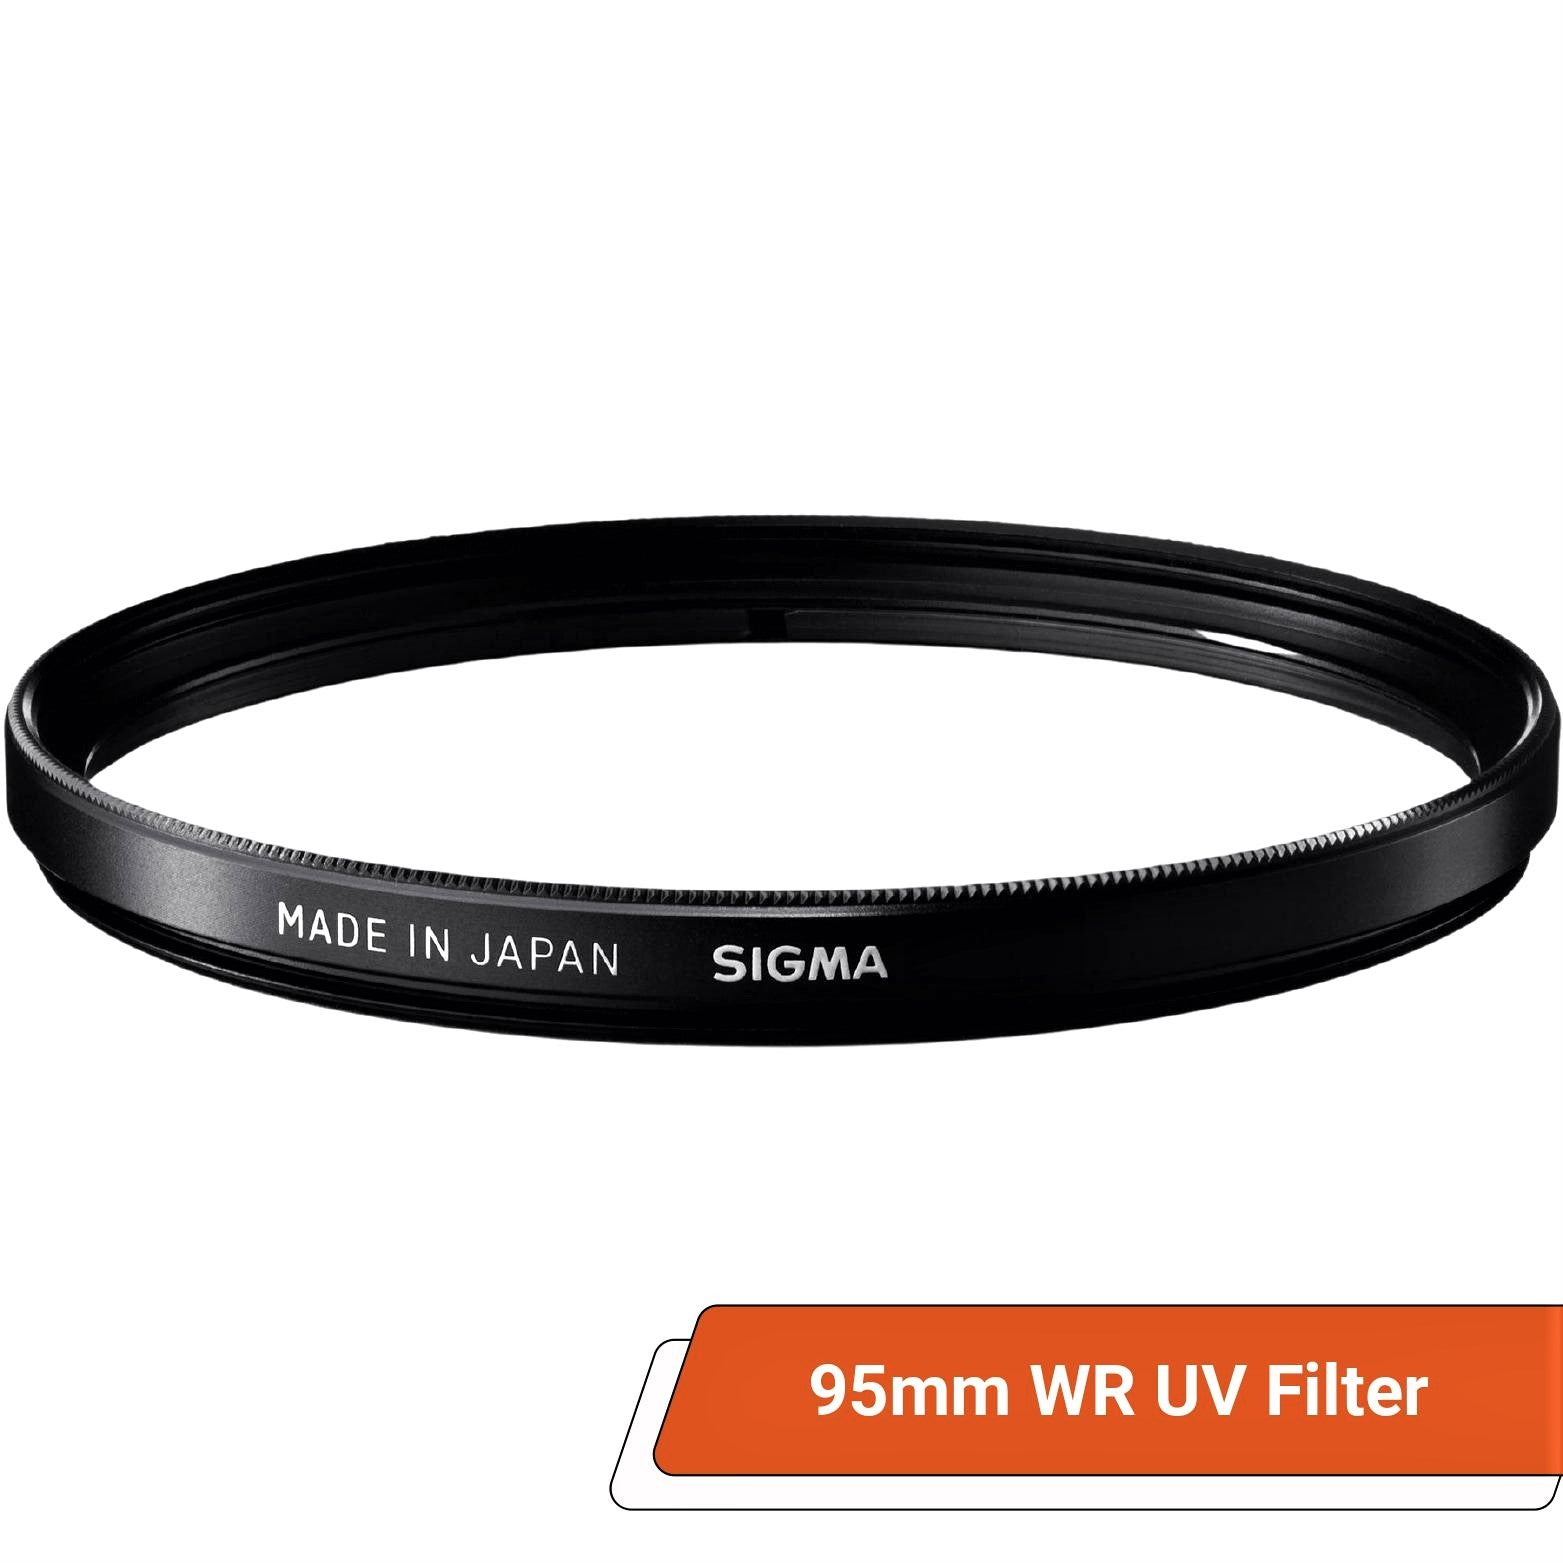 Sigma 95mm WR (Water Repellent) UV Filter